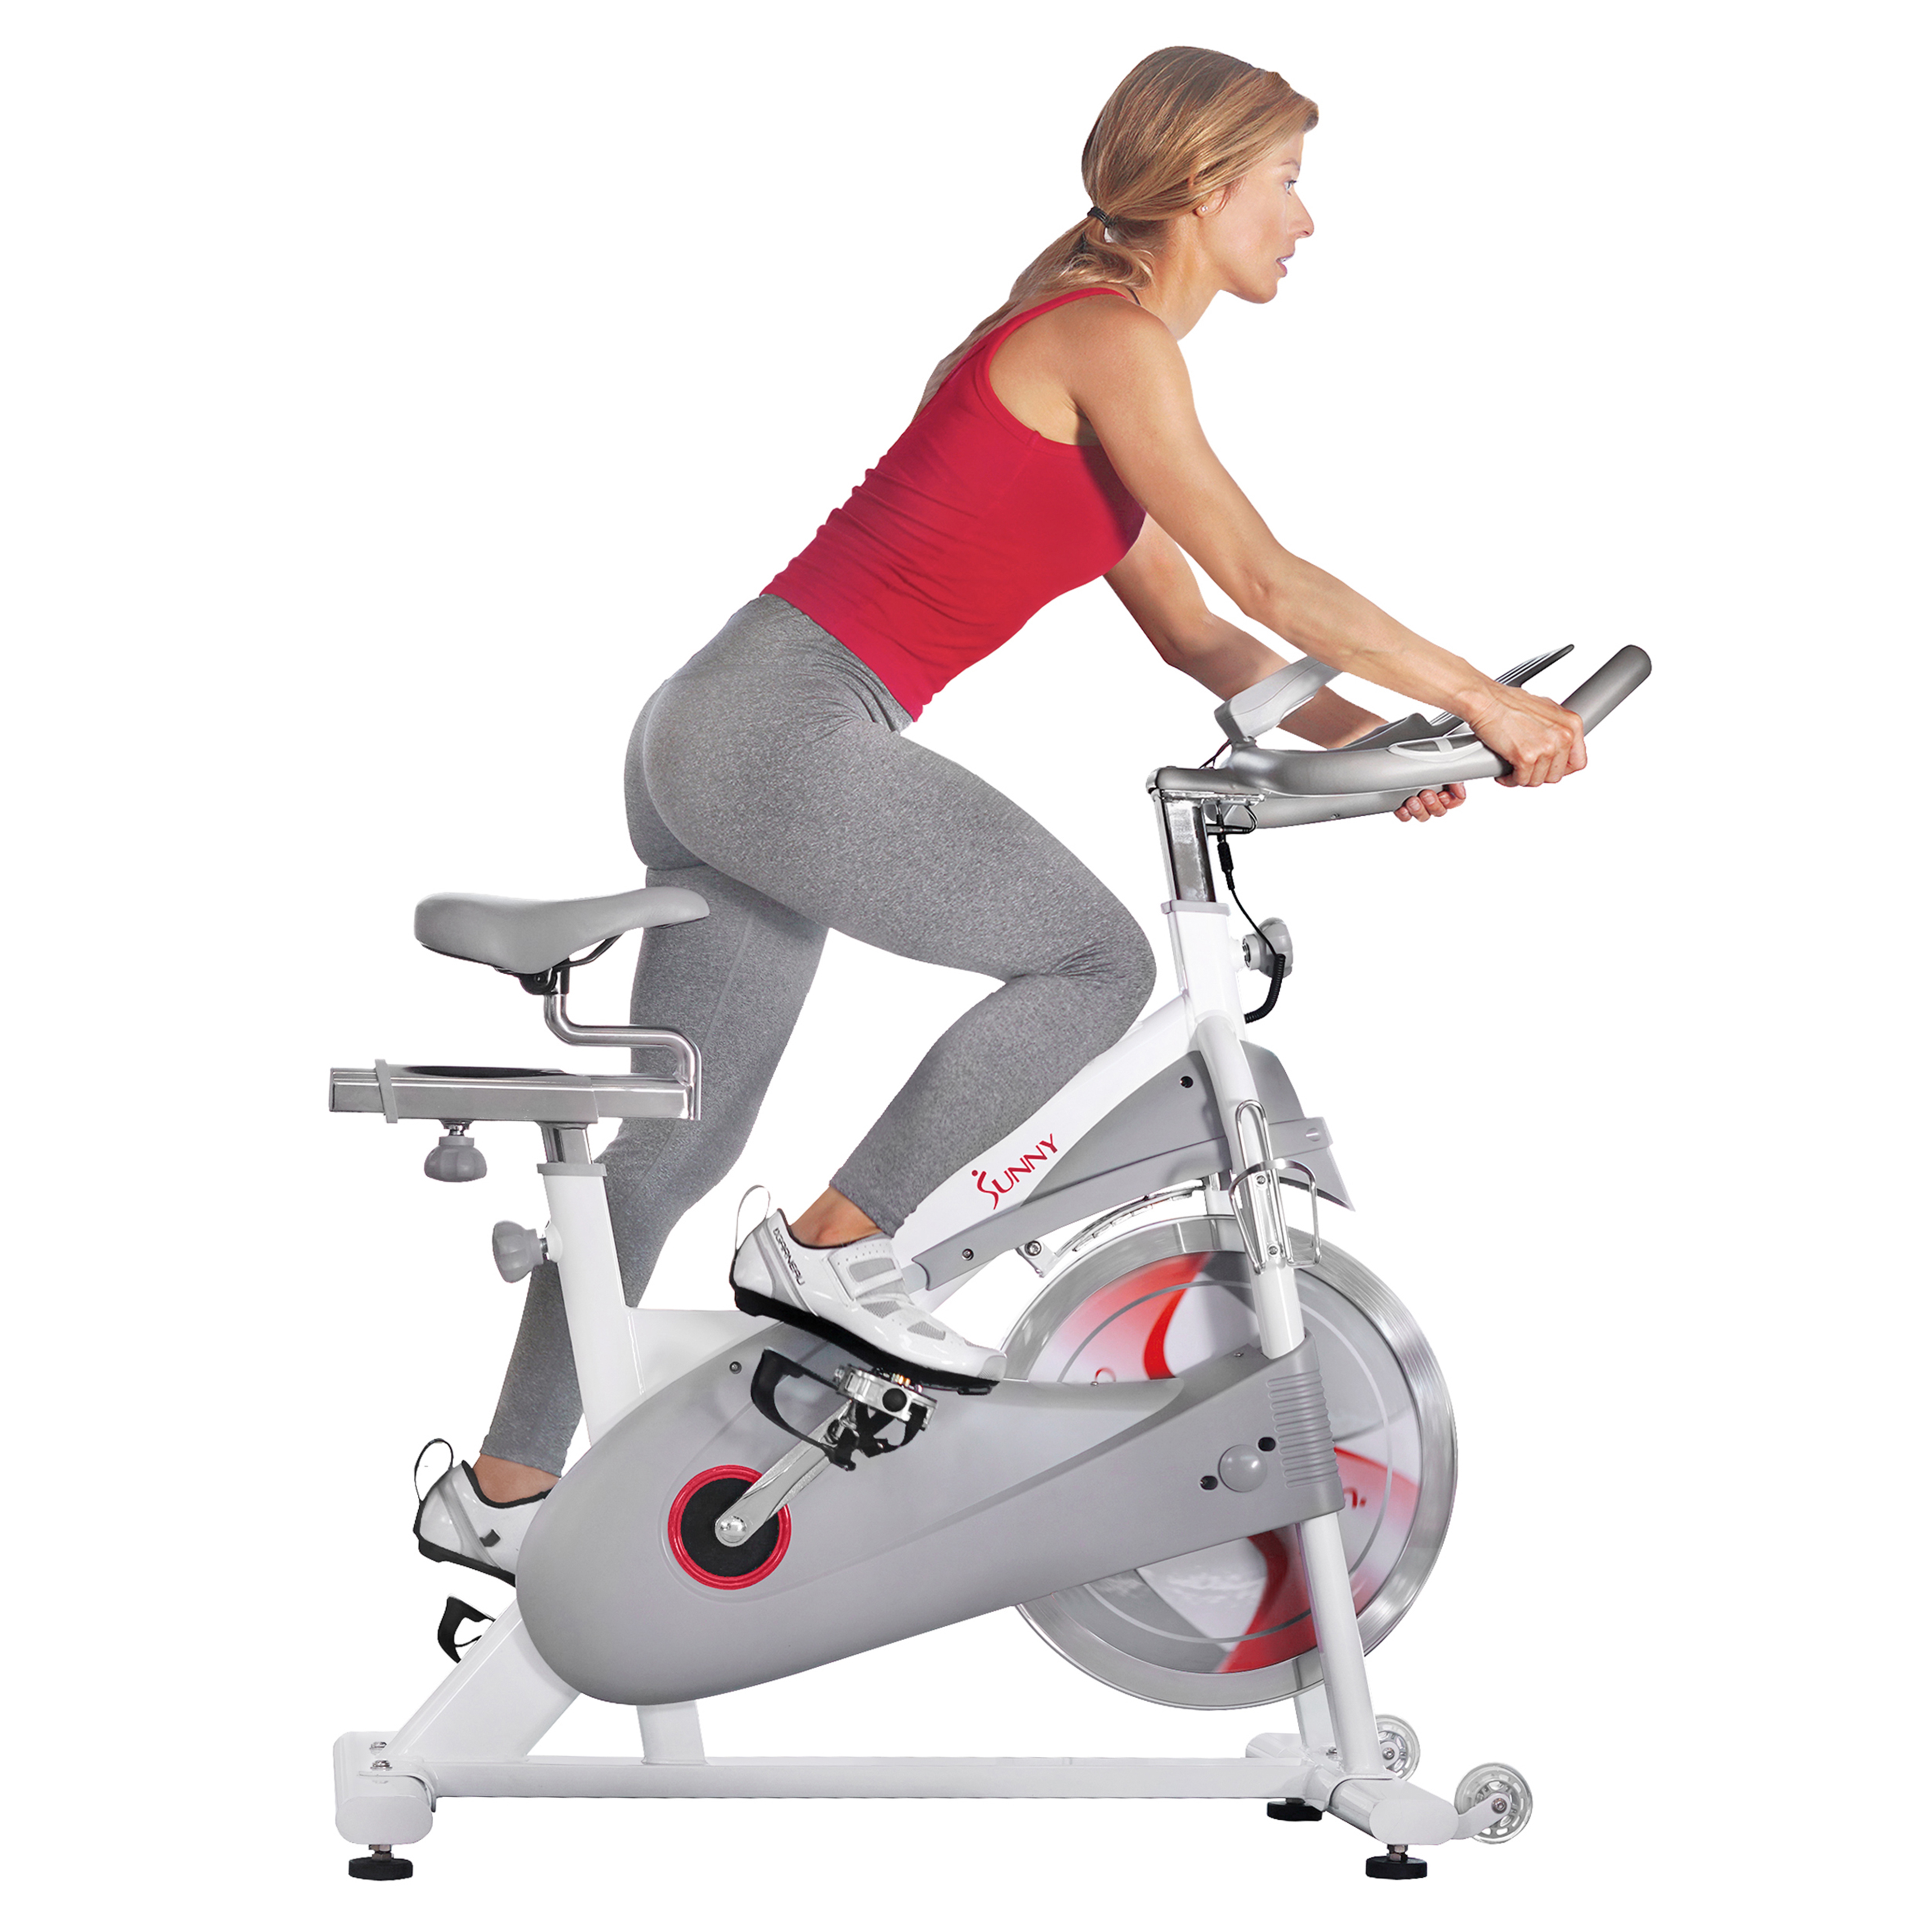 Sunny Health & Fitness Magnetic Belt Drive Premium Indoor Cycling Bike - SF-B1876 - image 4 of 7